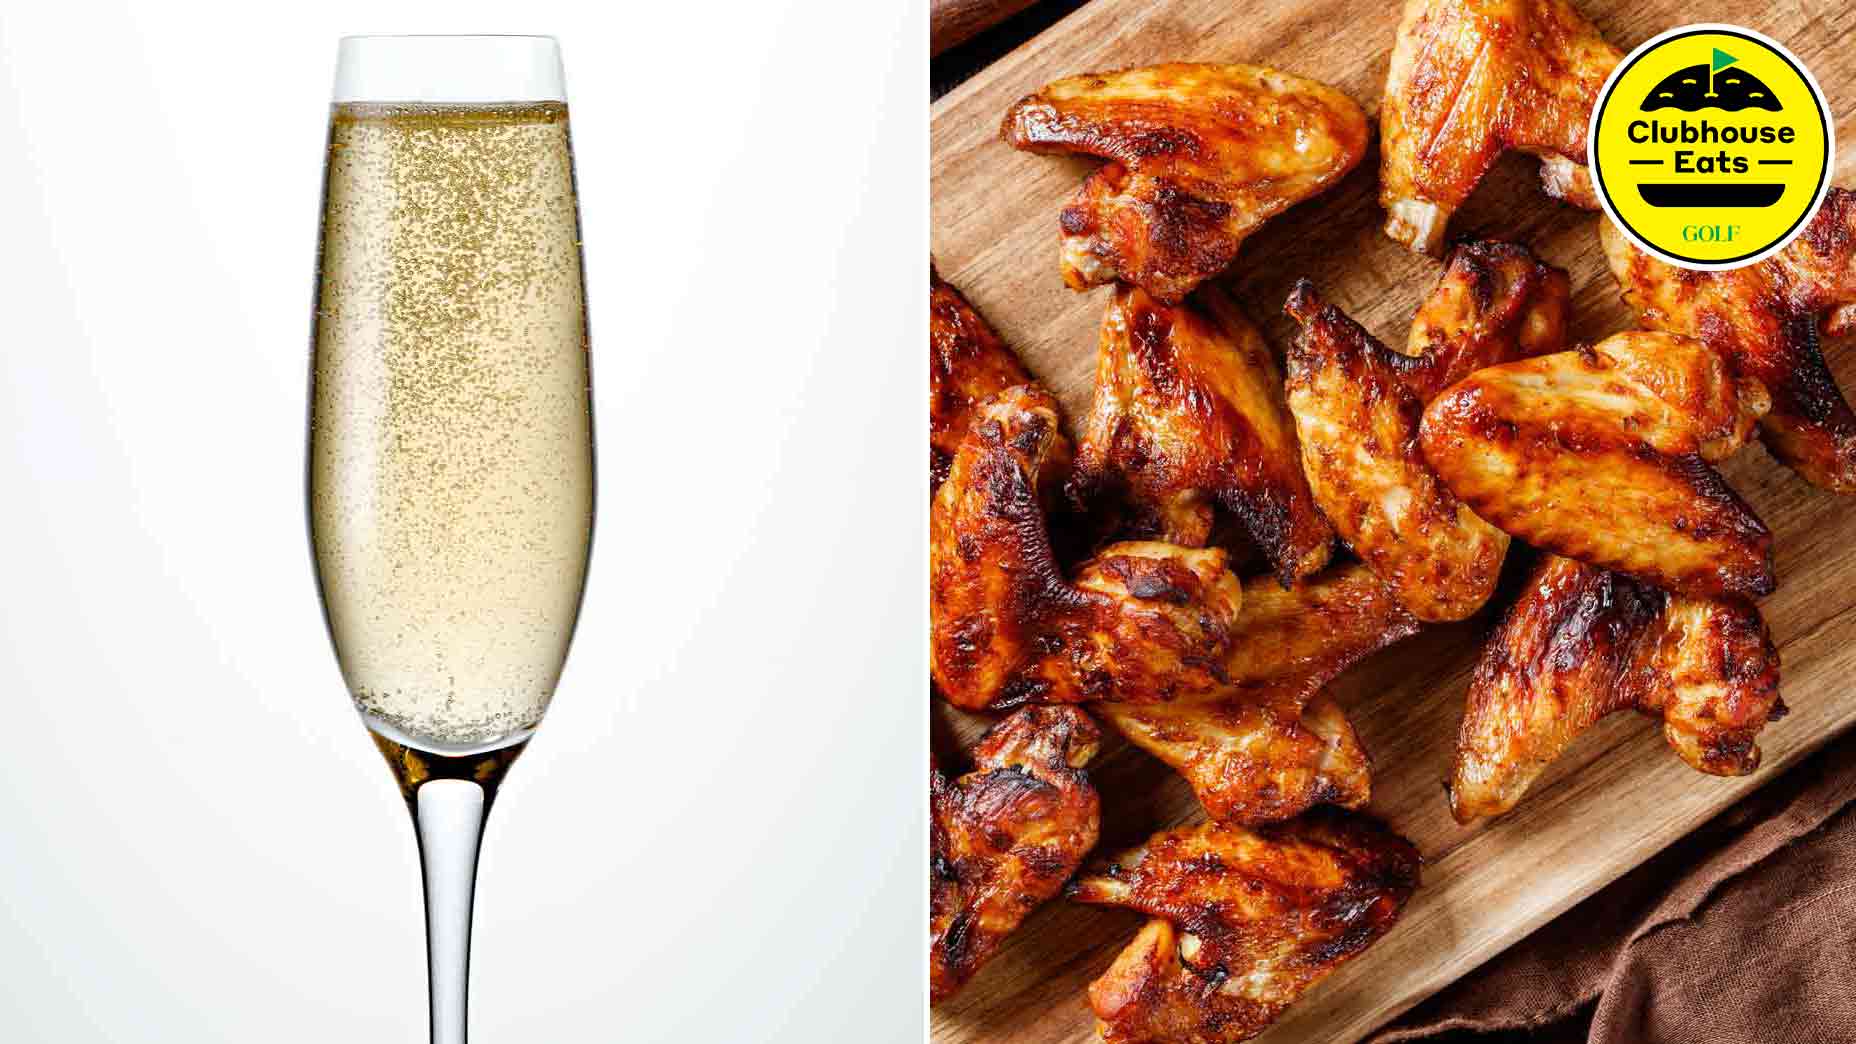 The Unsuspecting Thing You Should Be Pairing with Your Champagne